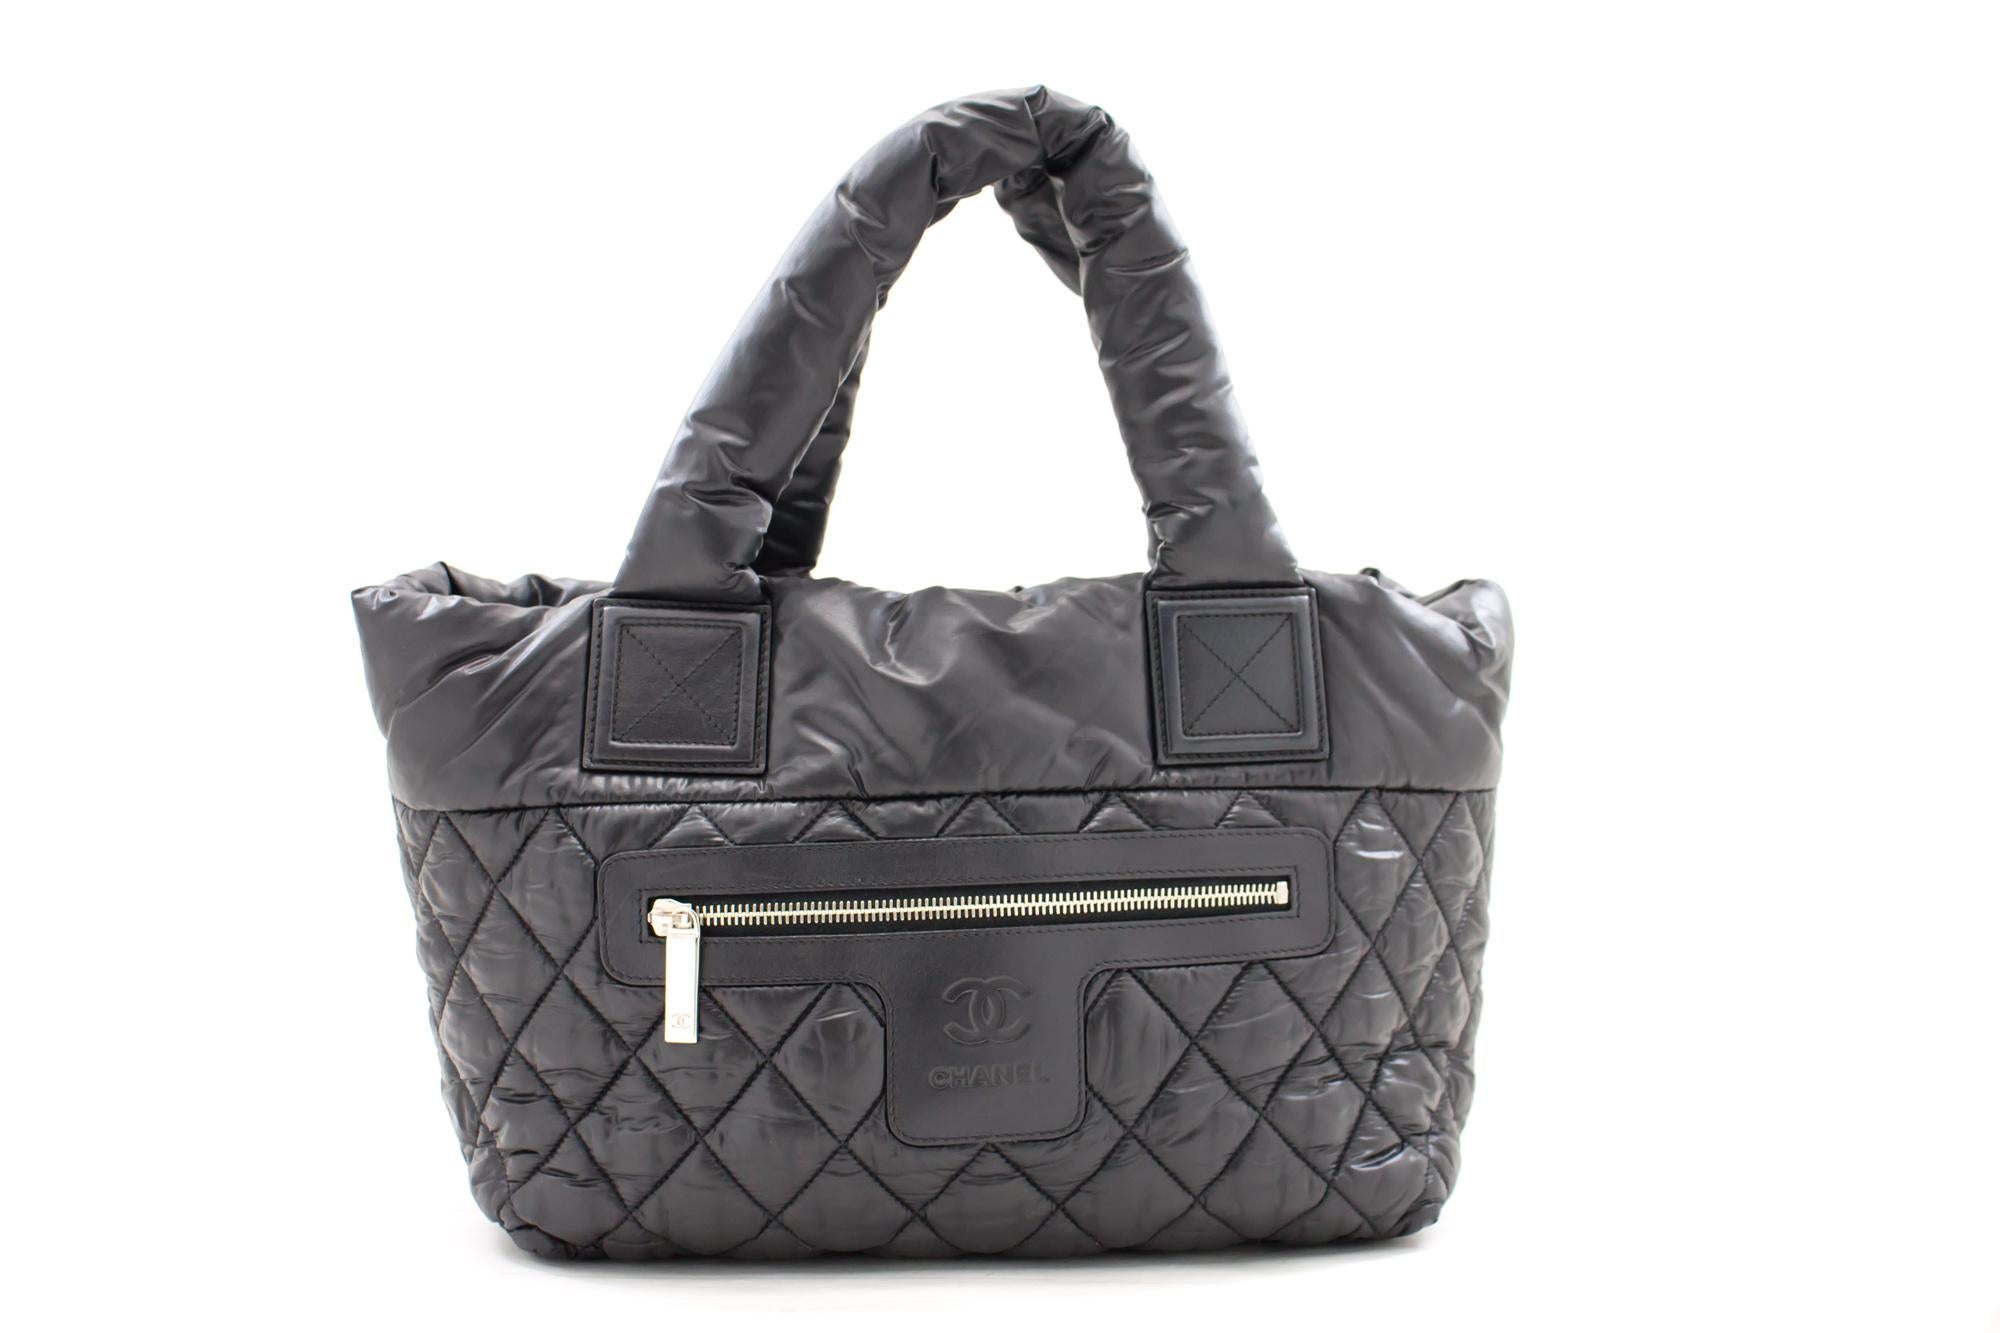 An authentic CHANEL Coco Cocoon PM Nylon Tote Bag Handbag Black Leather. The color is Black. The outside material is Nylon. The pattern is Solid. This item is Contemporary. The year of manufacture would be 2011.
Conditions & Ratings
Outside